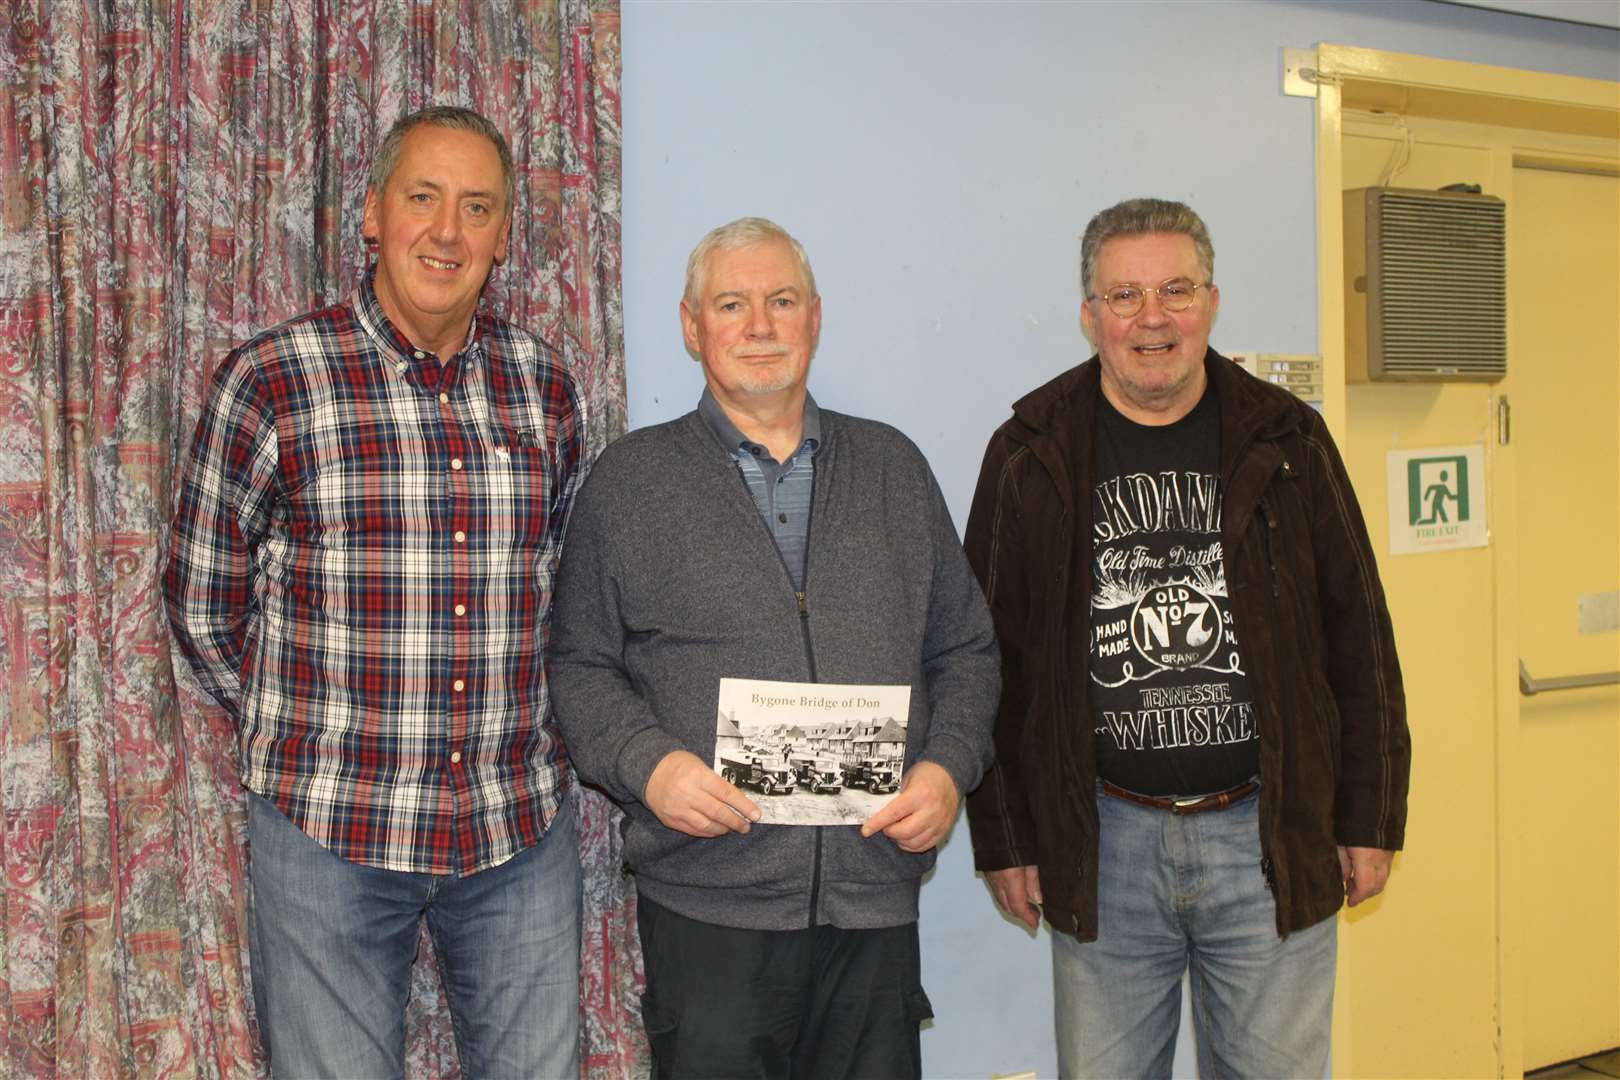 Grampian Postcard club secretary Brian Watt ( left) with Gordon Pirie, author of Bygone Bridge of Don and club member George Mauchline at this week's meeting. Picture: Griselda McGregor